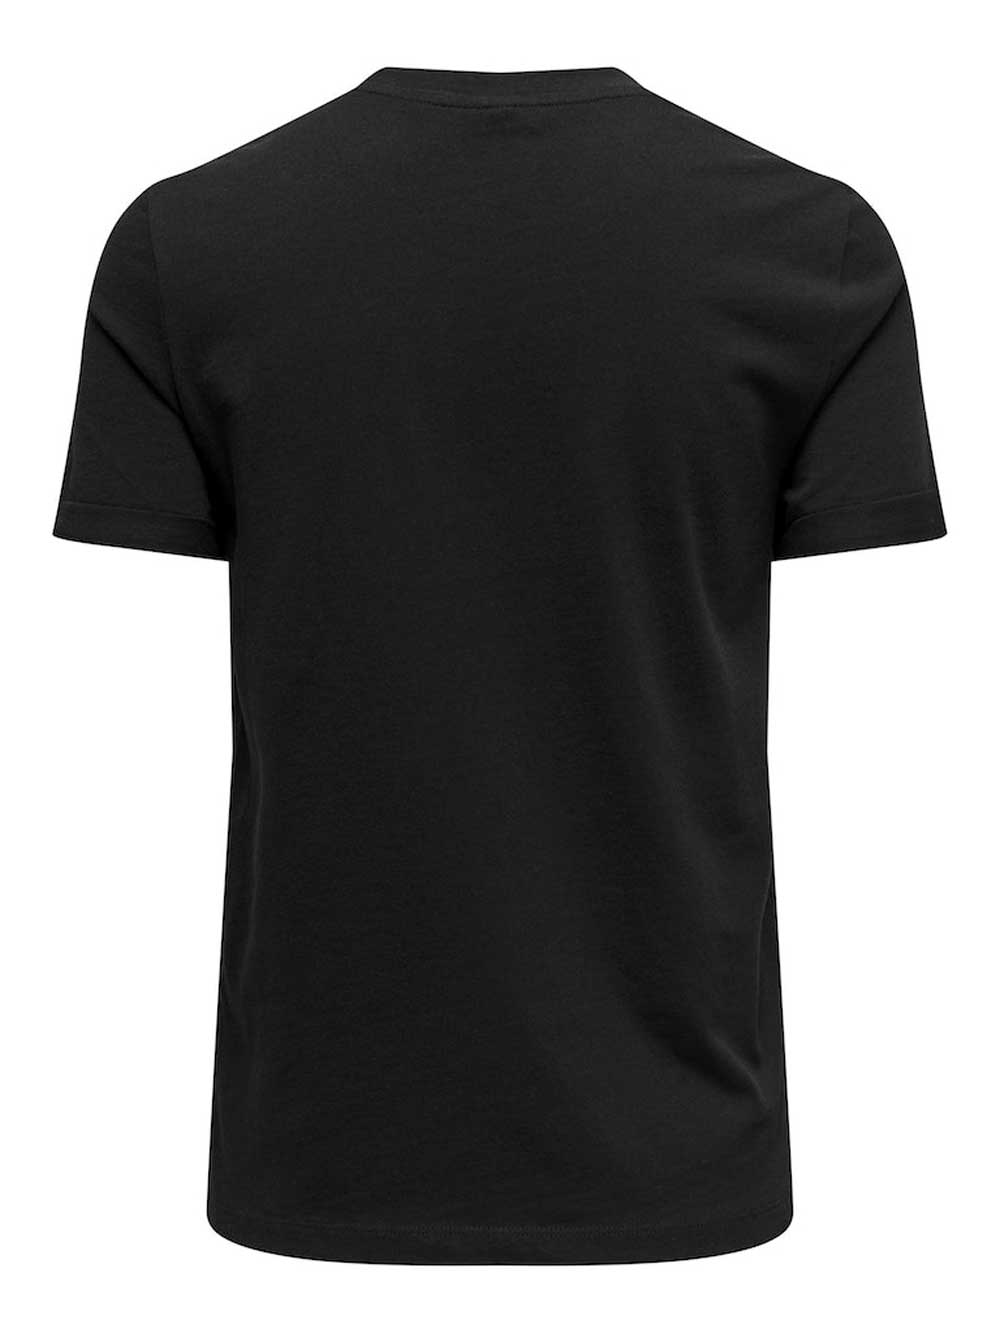 ONLY T-shirts e Tops ONLY da DONNA - nero